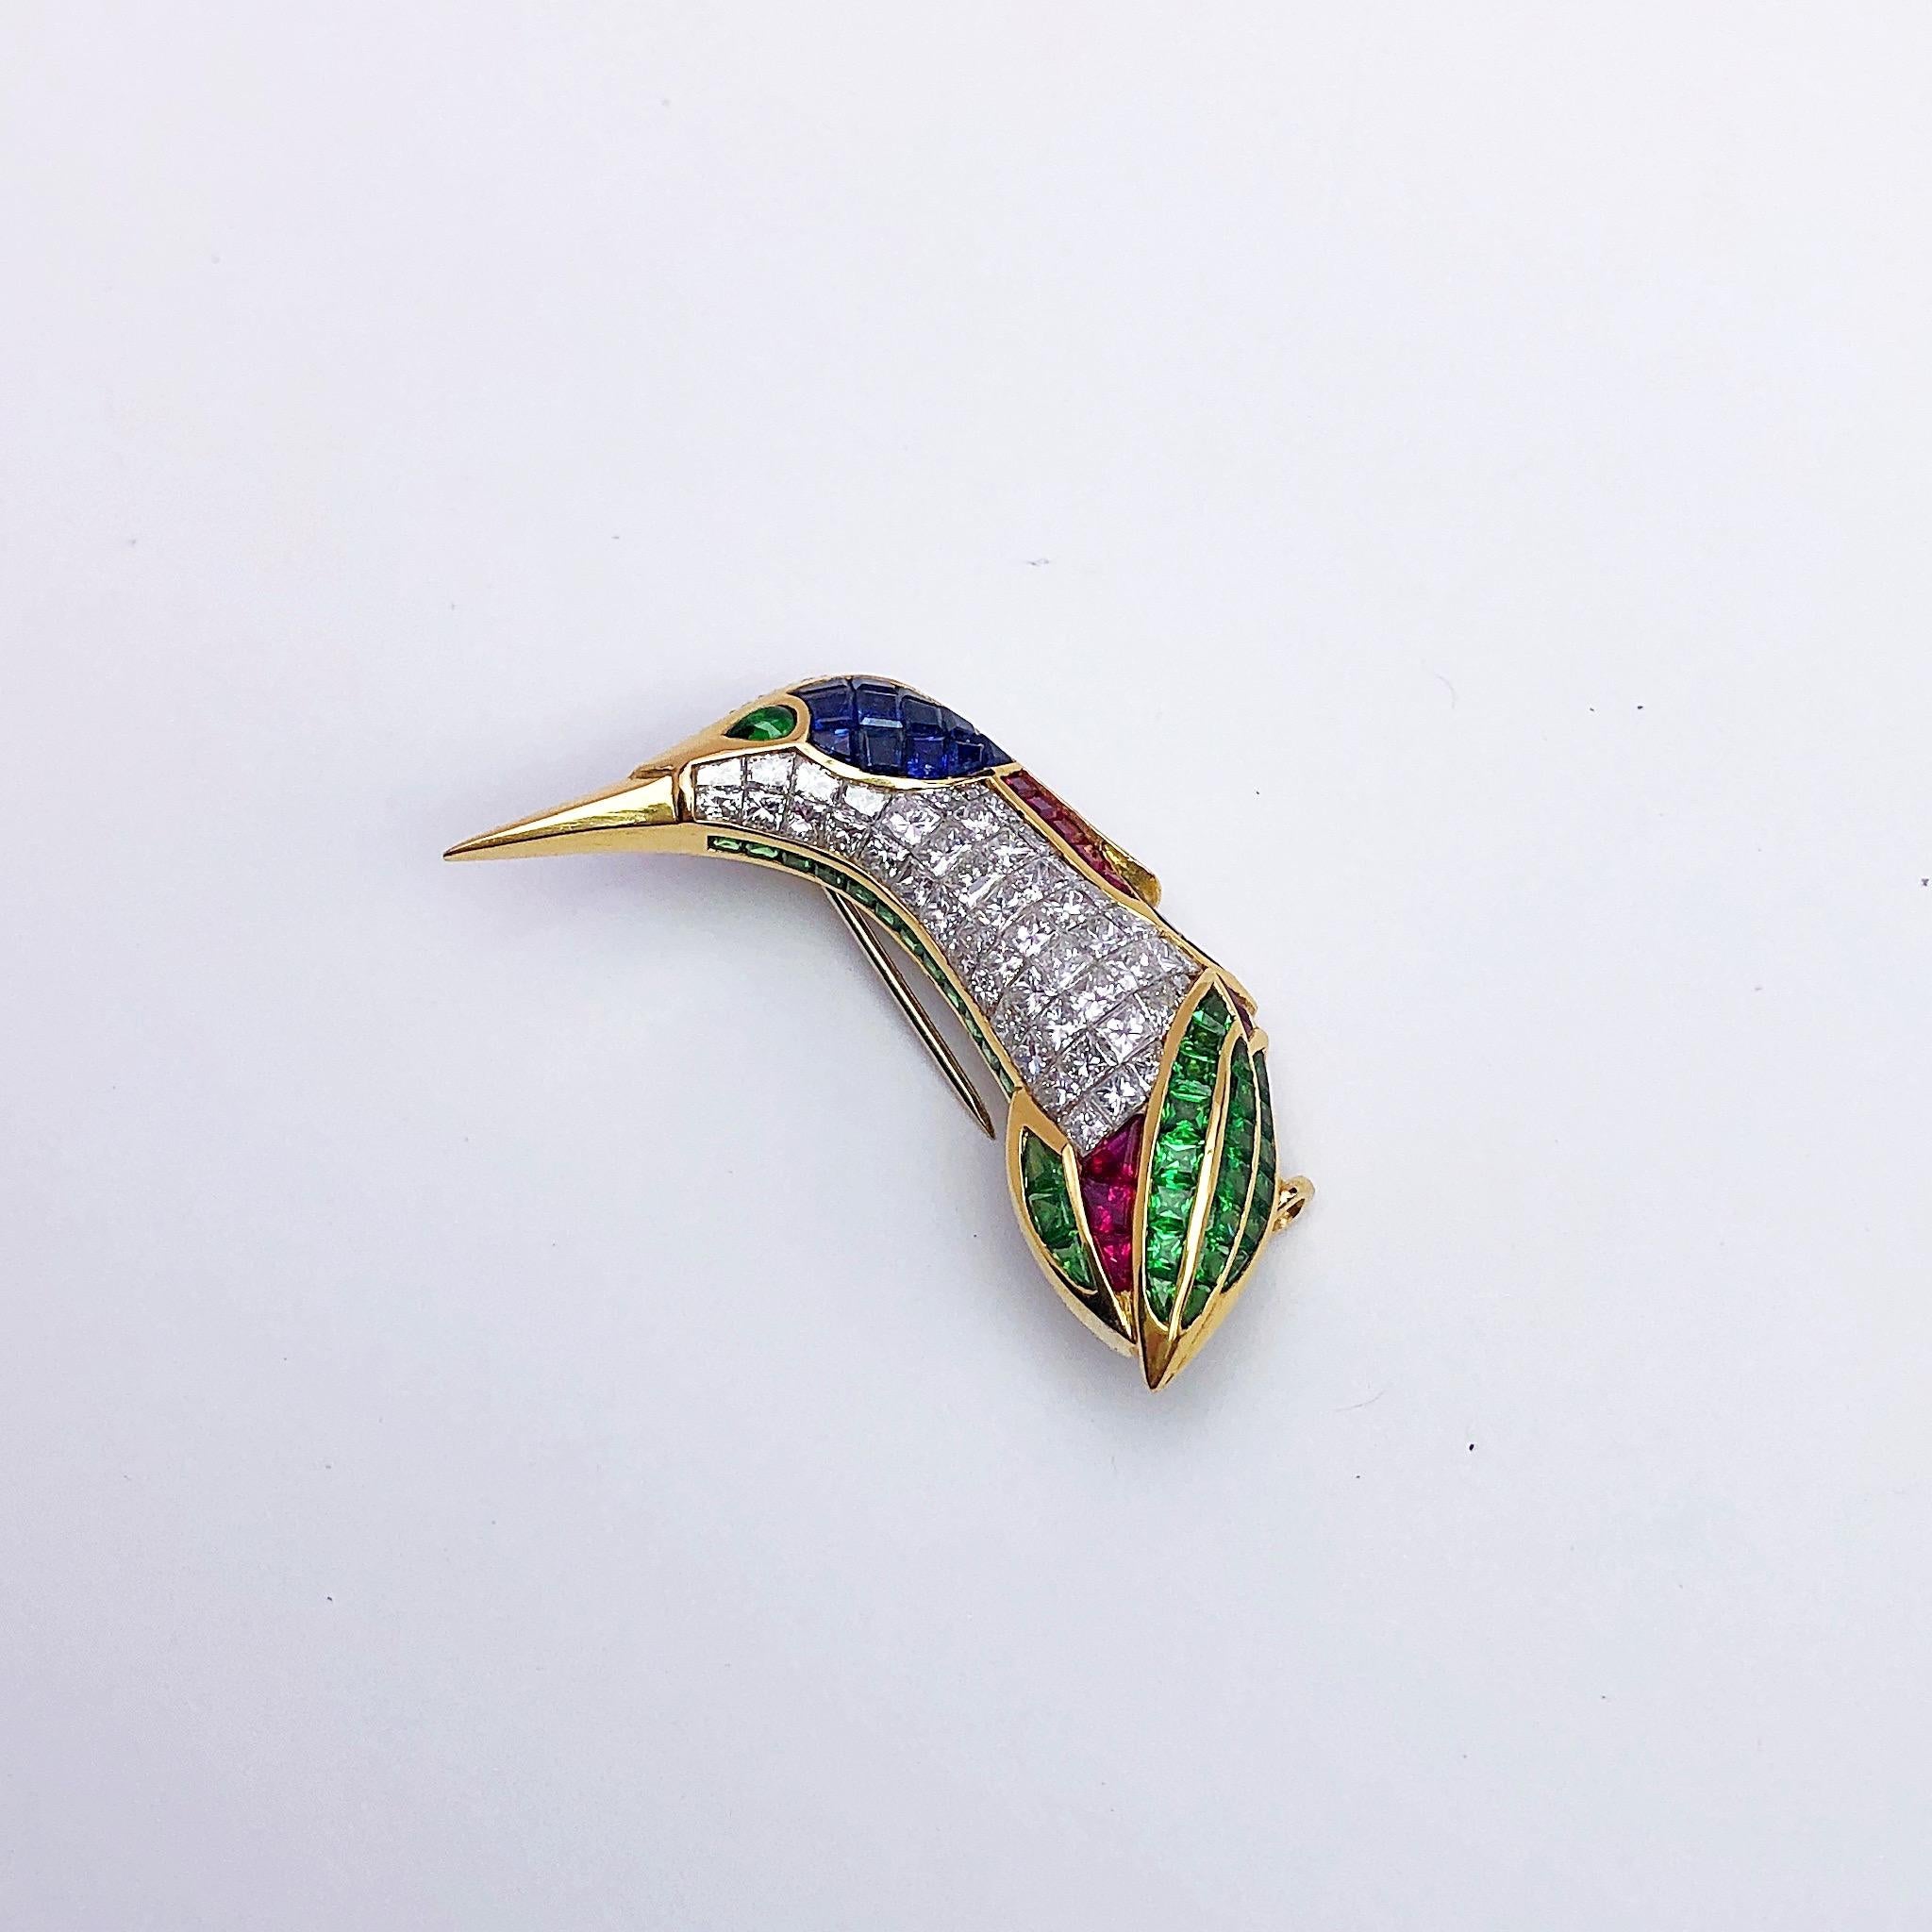 Designed in 18 karat yellow gold , this humming bird brooch is beautifully depicted with gem stones of diamonds, rubies, emeralds and blue sapphires. The combination of the different cut stones including princess, square, round brilliant and